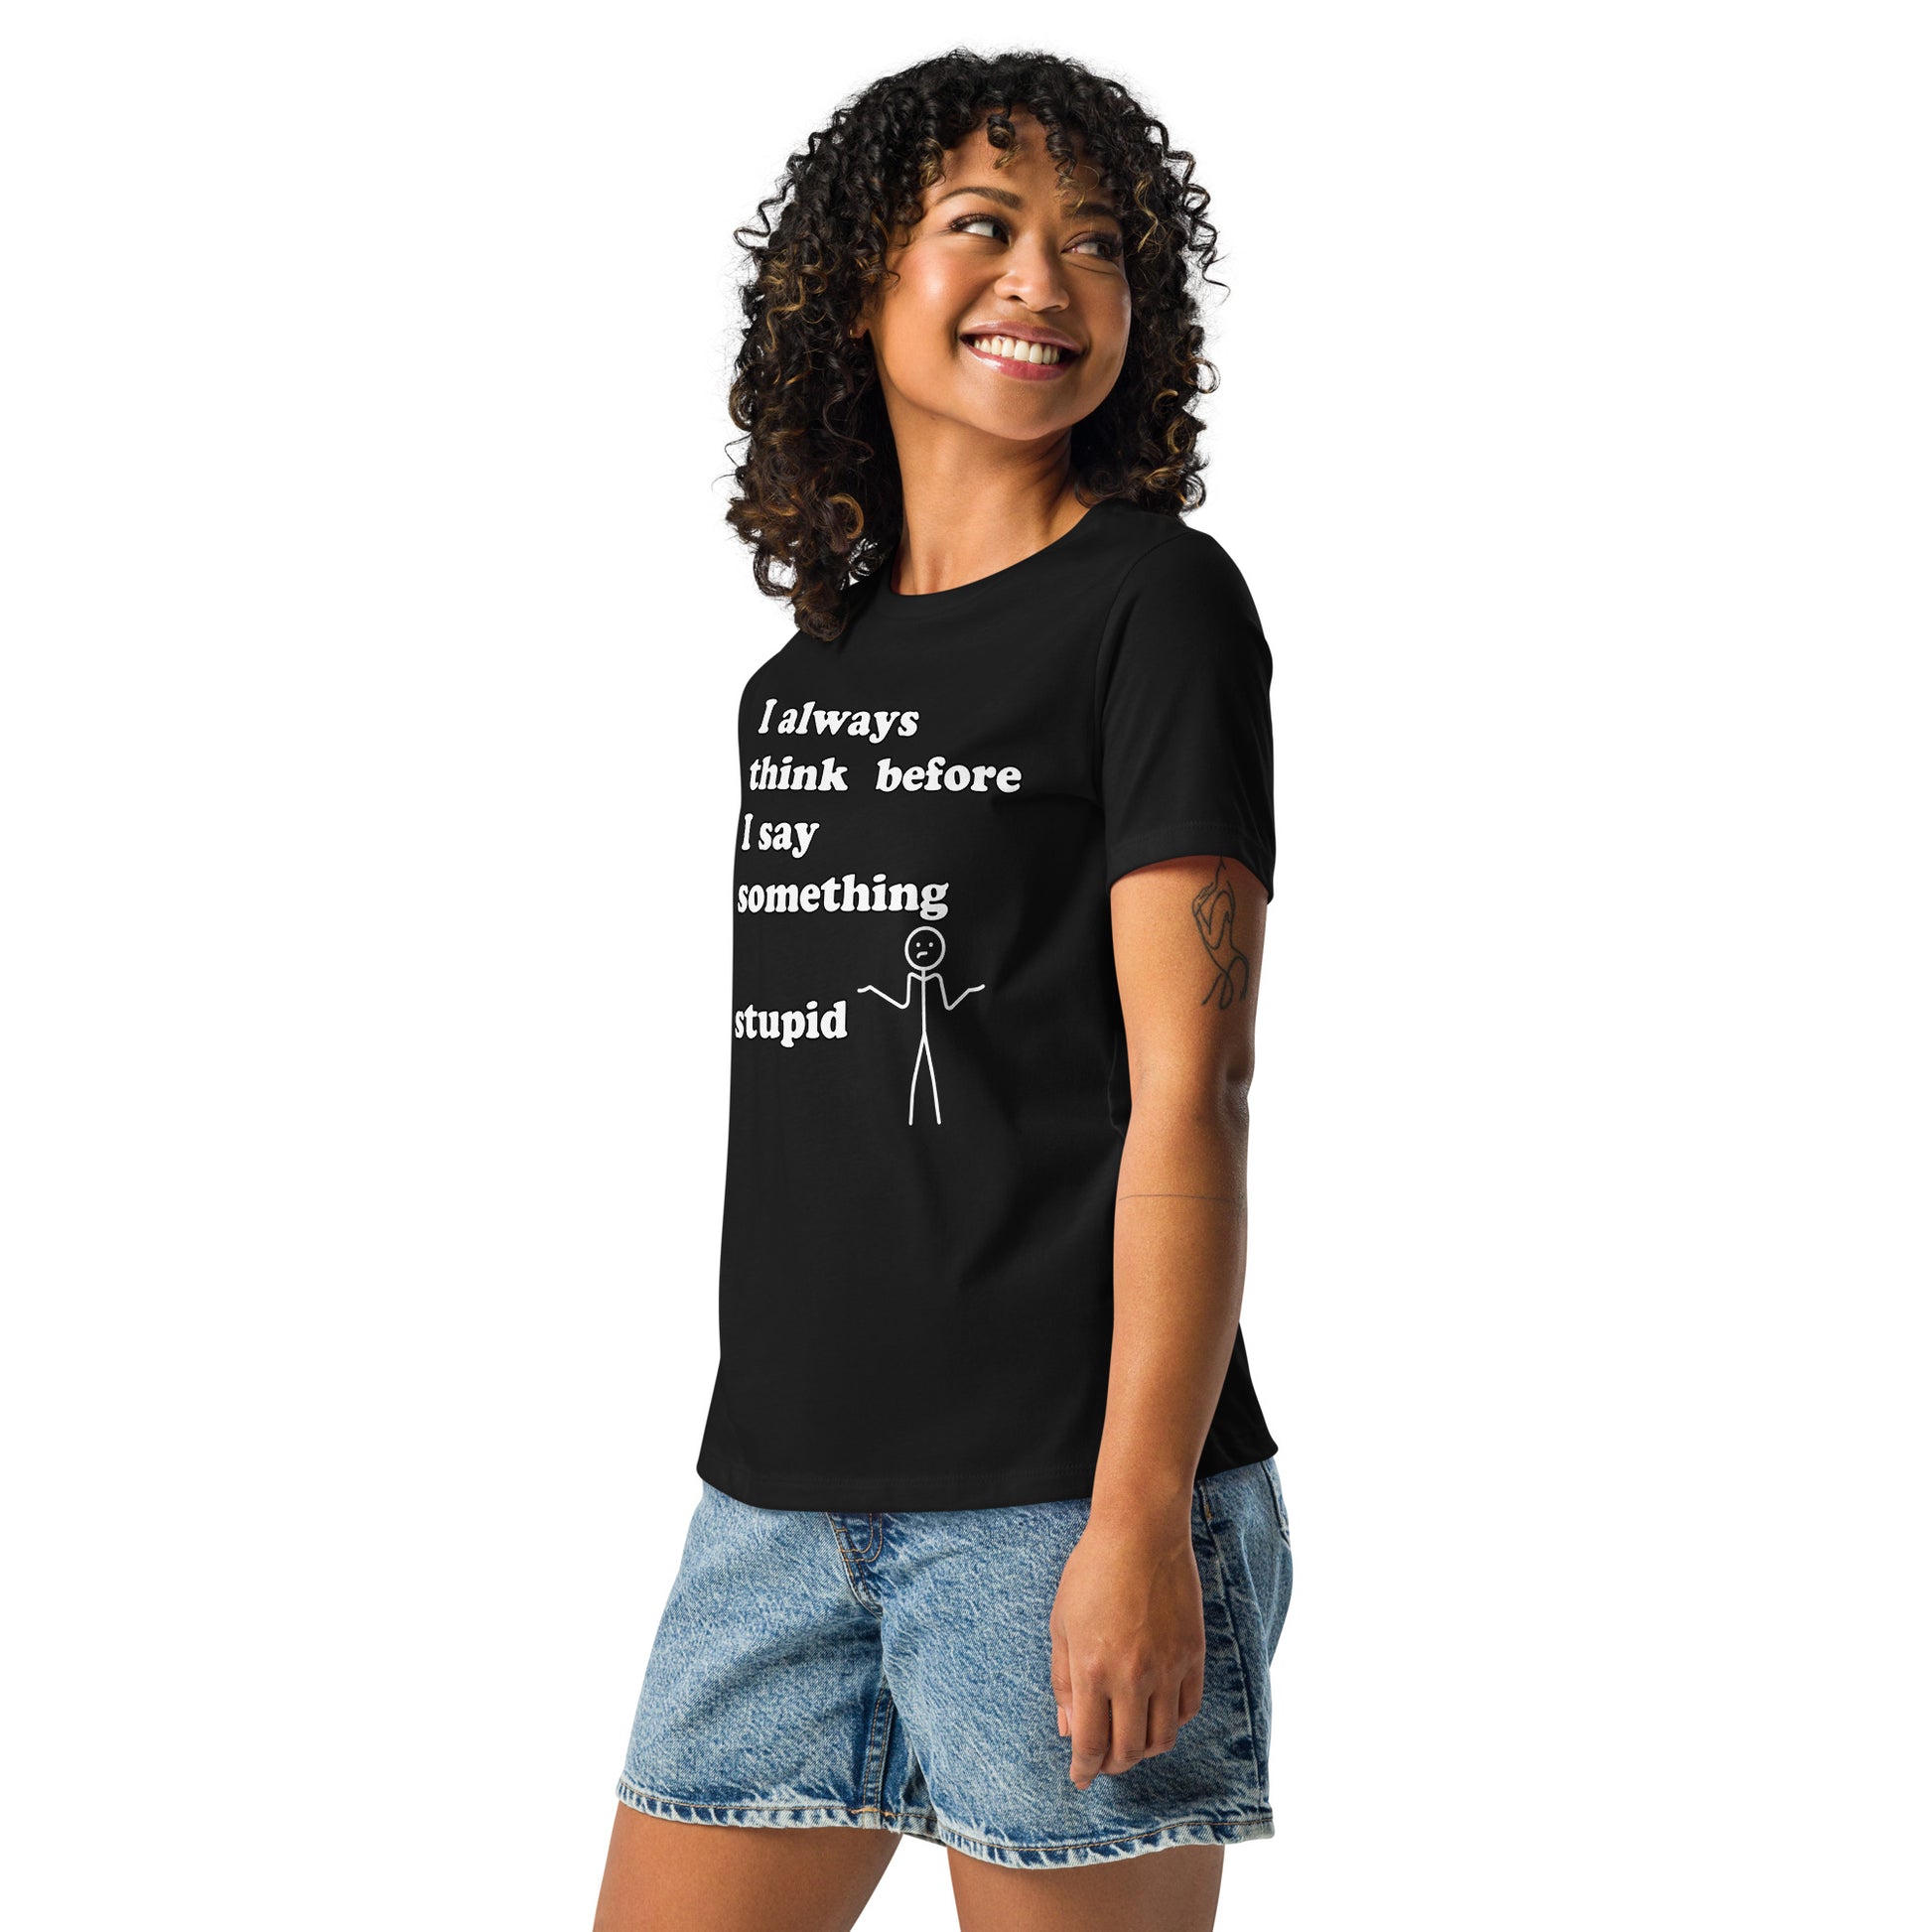 Woman with black t-shirt with text "I always think before I say something stupid"